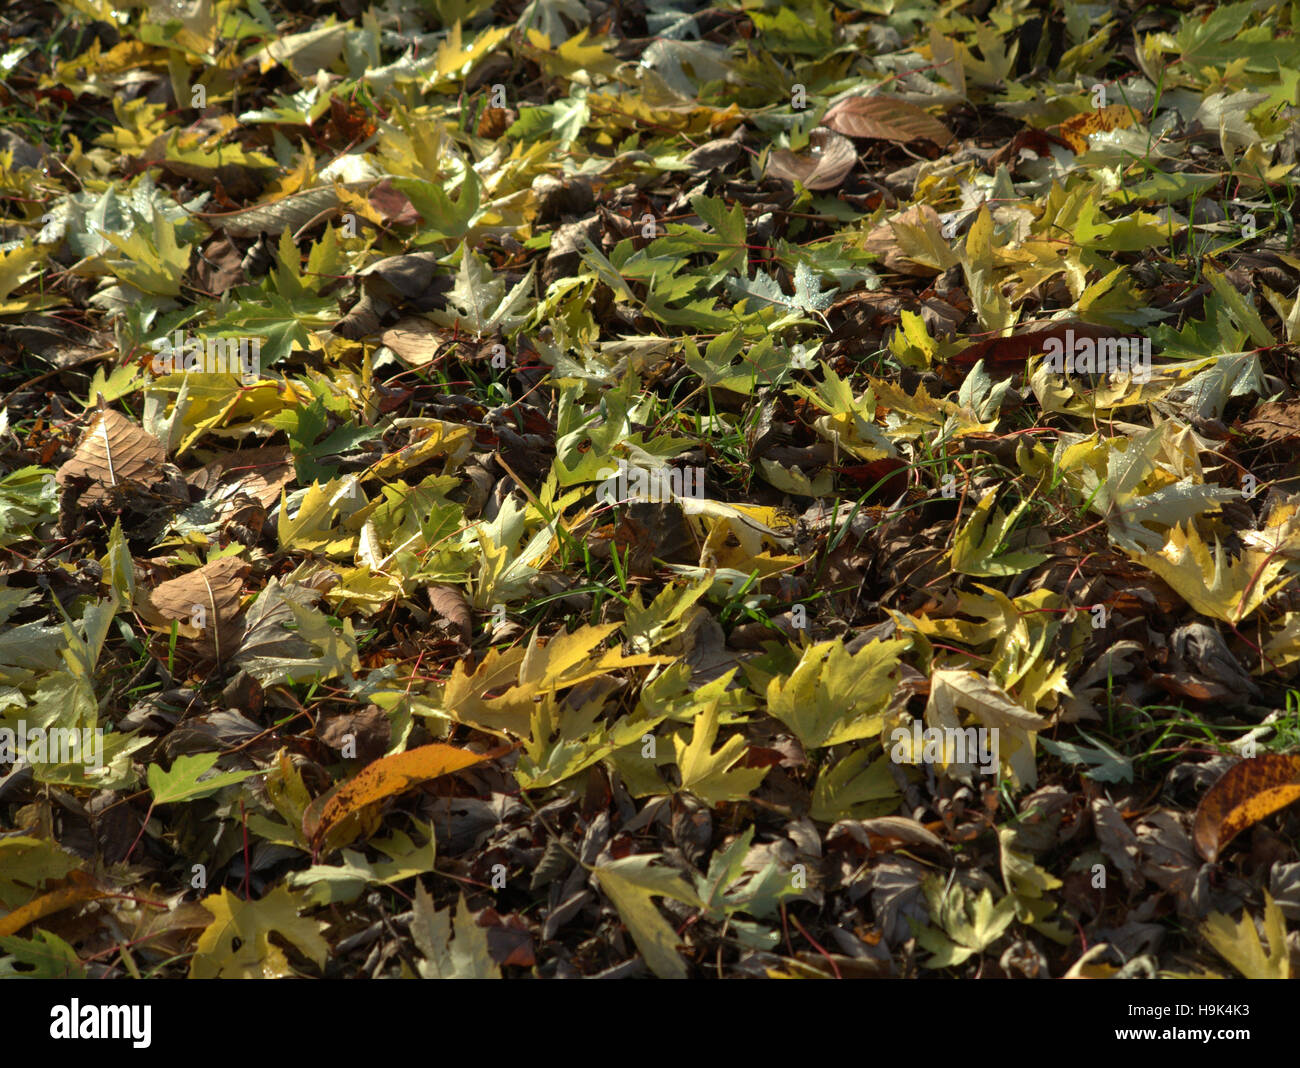 Abstract leaf backgrounds fallen leaves on the forest floor Stock Photo